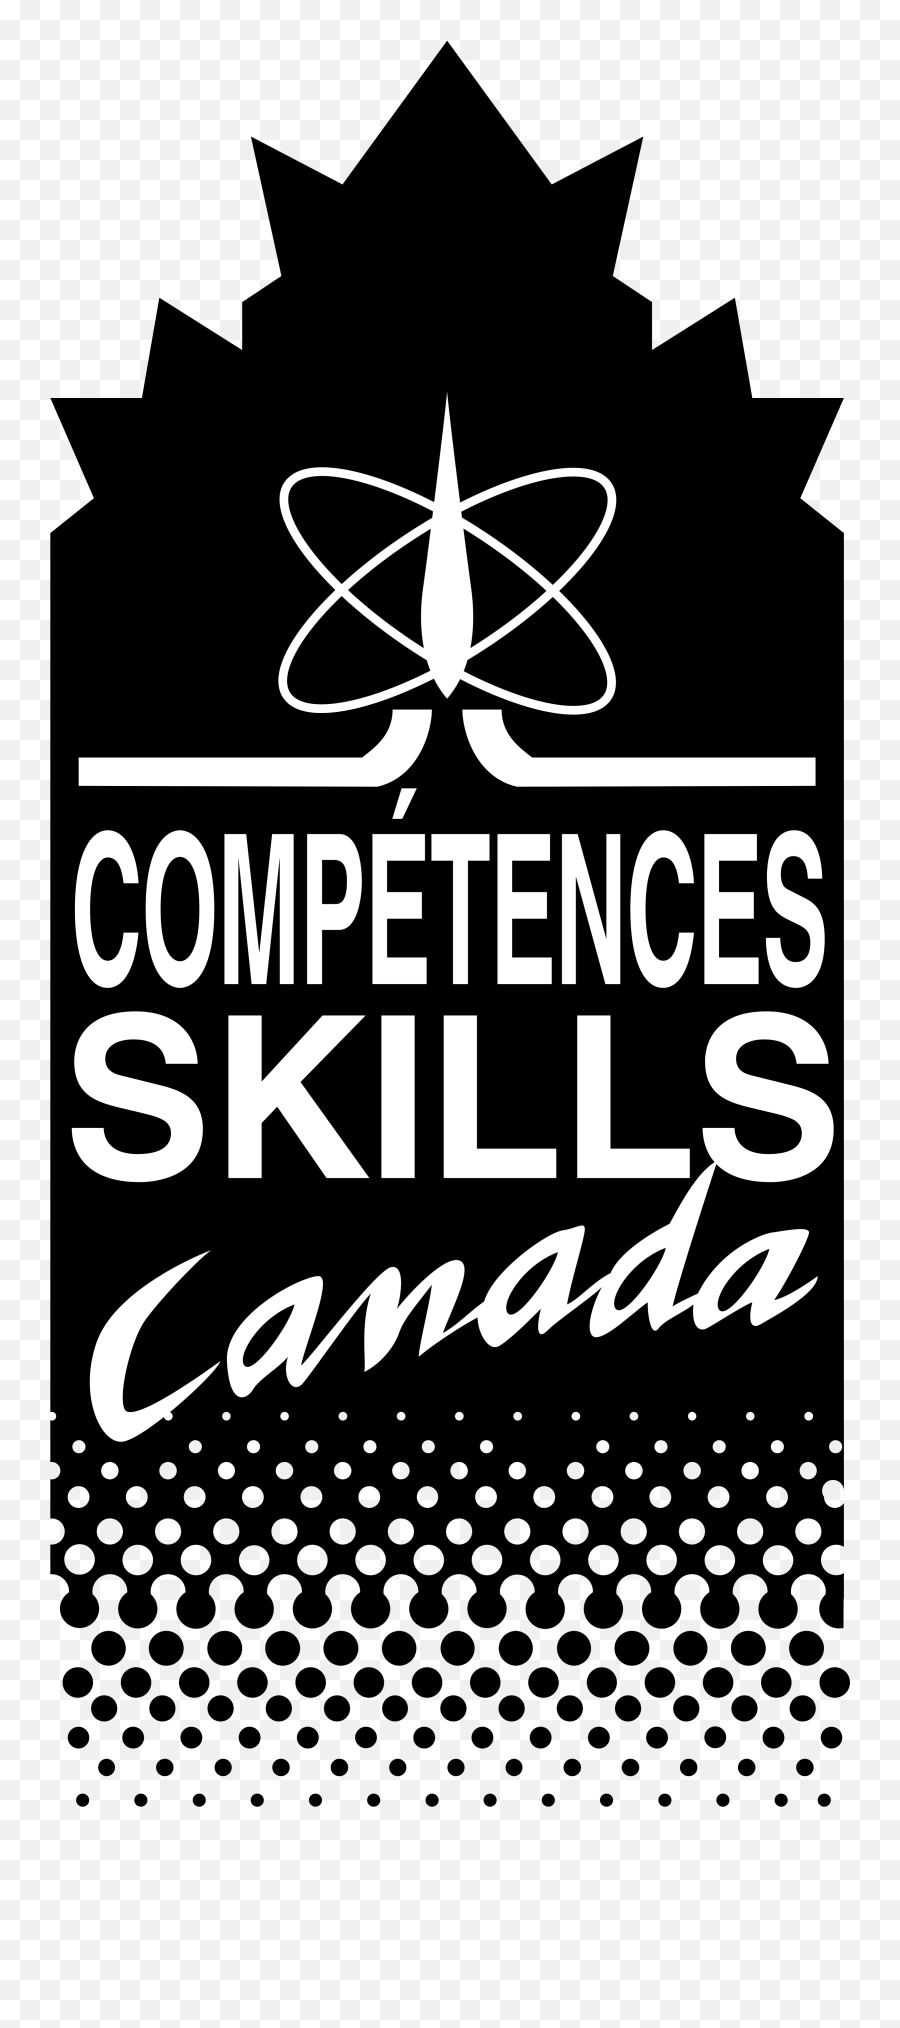 Competence Skills Canada Logo Png Transparent U0026 Svg Vector - Skills Canada,Skills Png